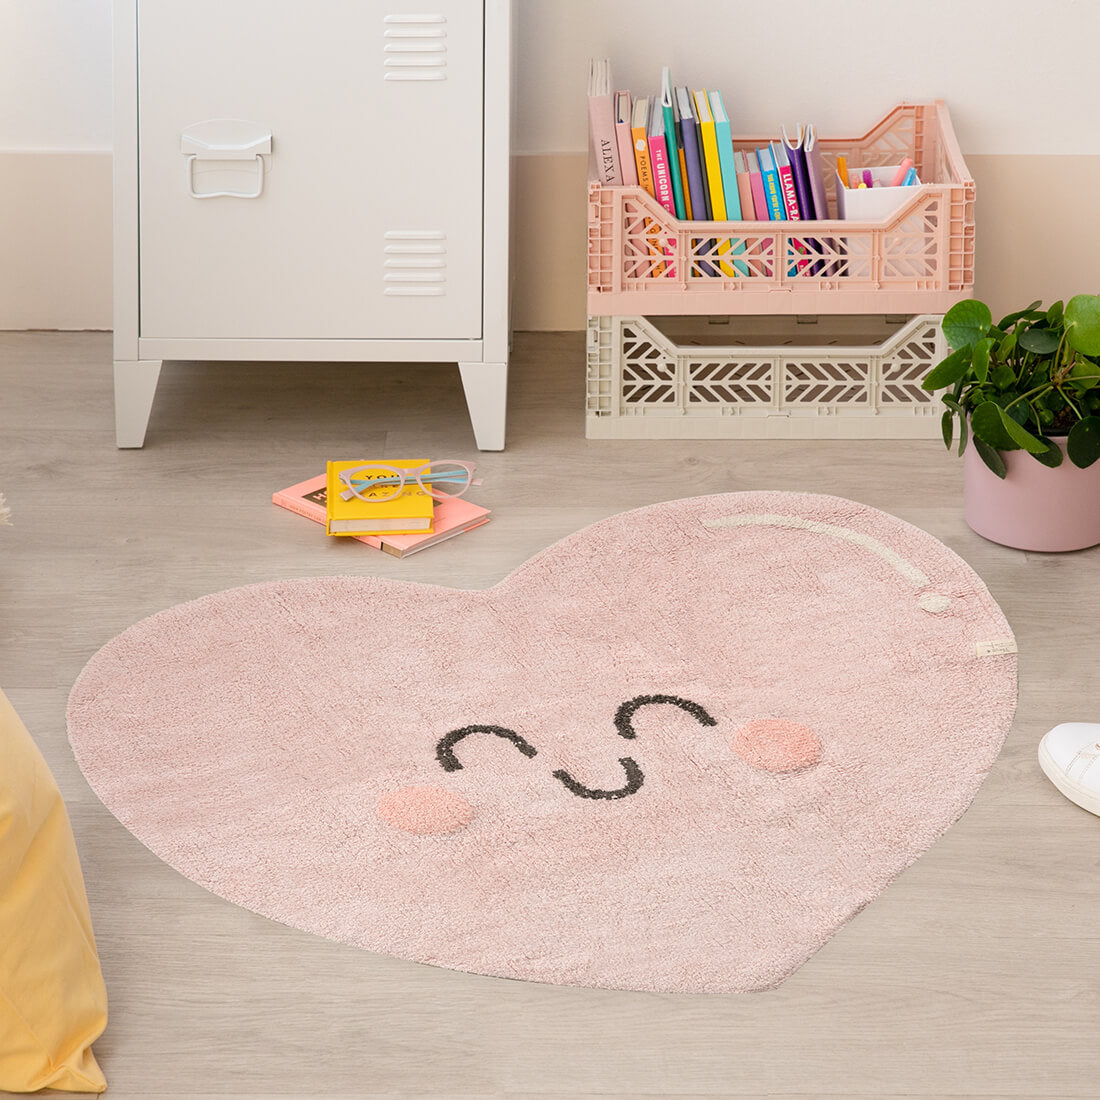  cotton tufted heart shaped rug